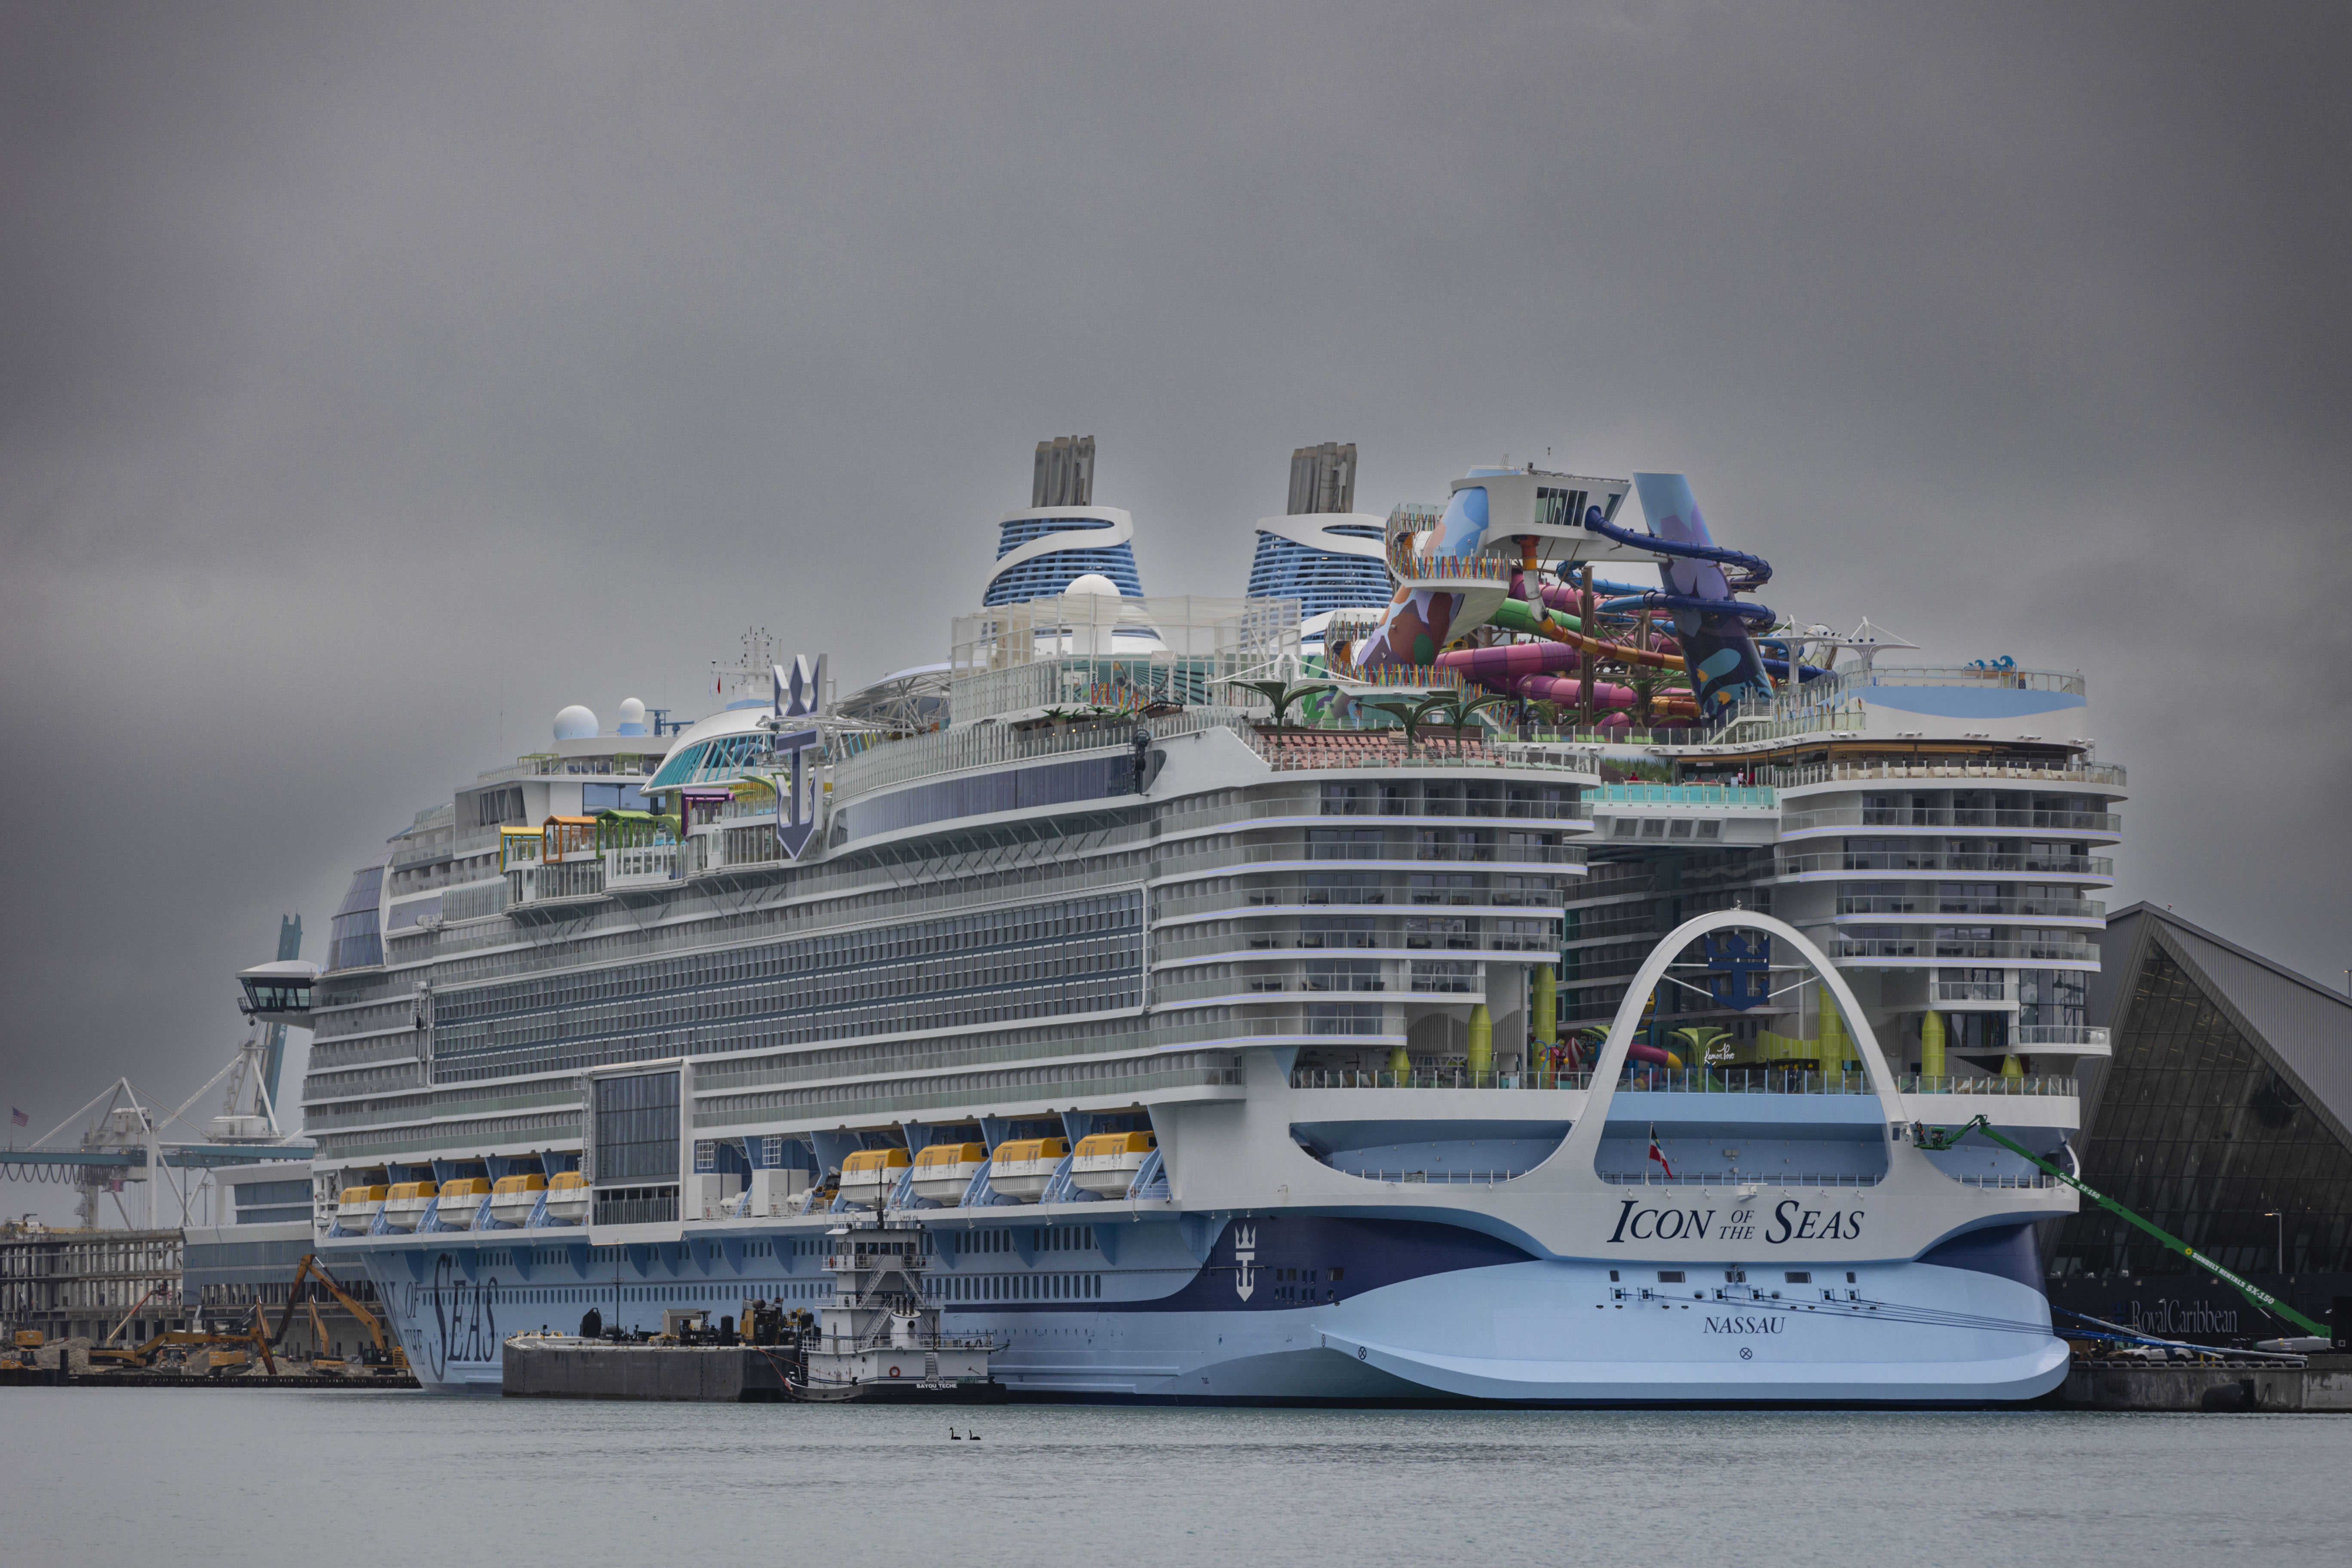 The Royal Caribbean vessel is called the Icon of the Seas